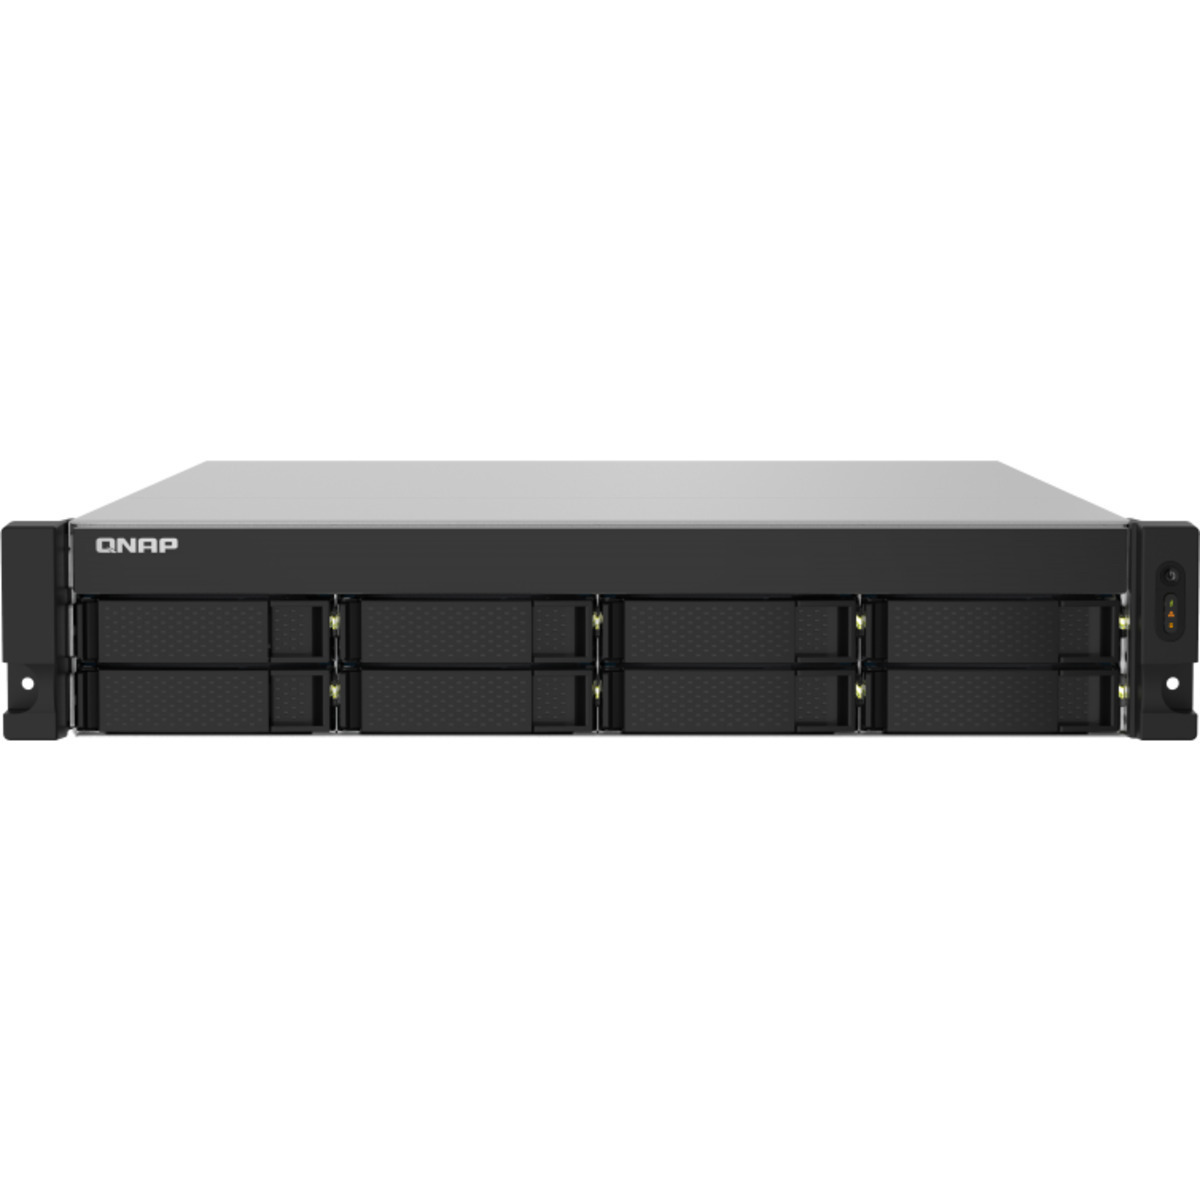 QNAP TS-832PXU 90tb 8-Bay RackMount Personal / Basic Home / Small Office NAS - Network Attached Storage Device 5x18tb Western Digital Gold WD181KRYZ 3.5 7200rpm SATA 6Gb/s HDD ENTERPRISE Class Drives Installed - Burn-In Tested - FREE RAM UPGRADE TS-832PXU